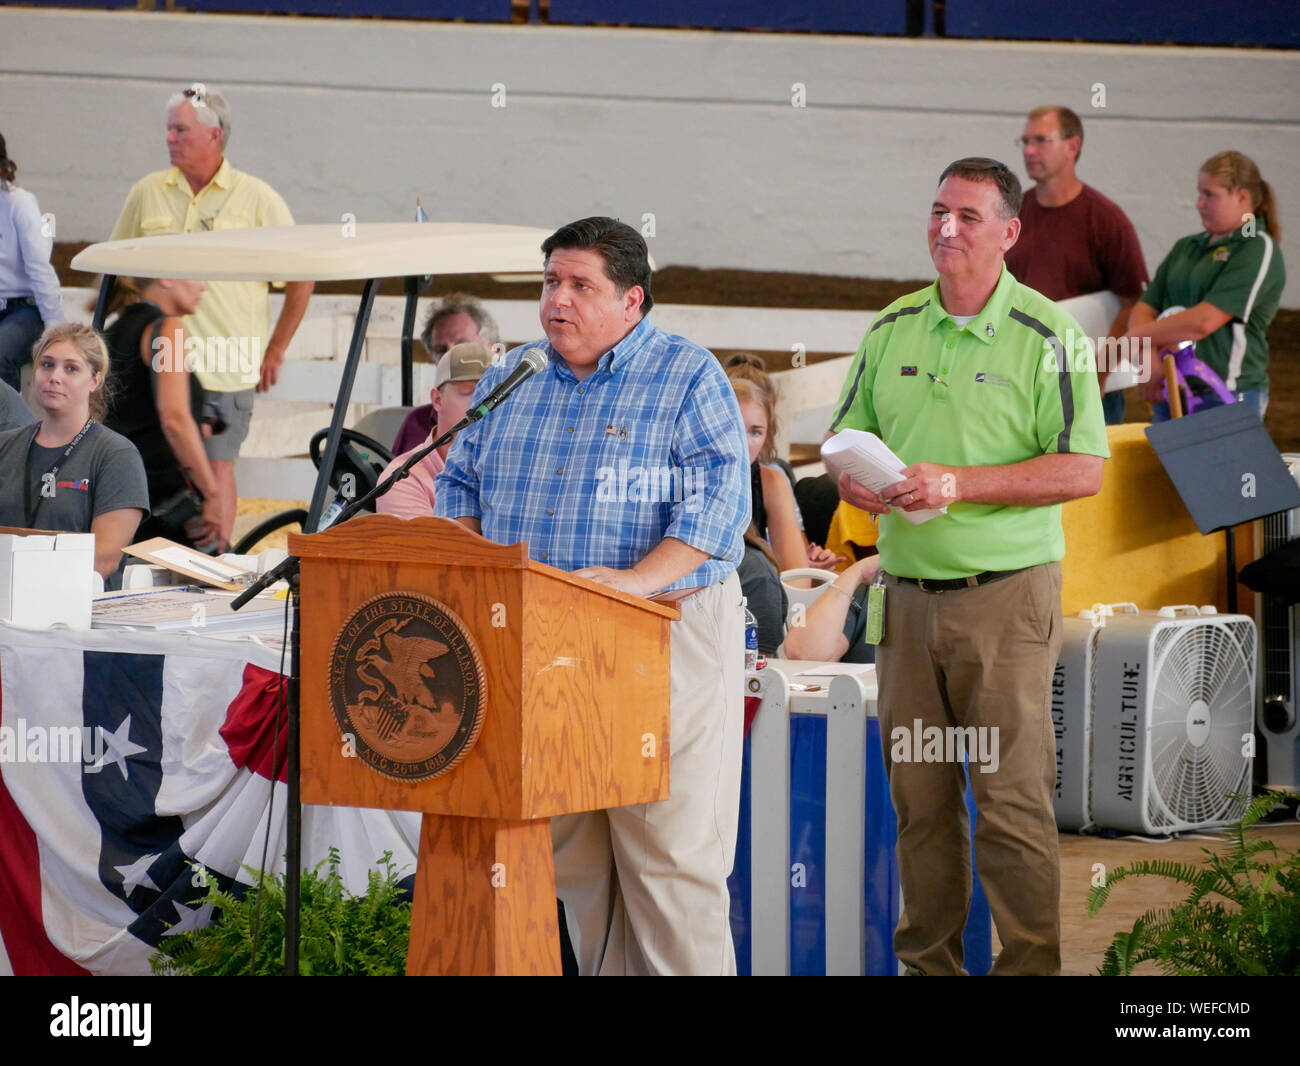 Springfield, Illinois, USA. 13th August 2019. Governor JB Pritzker speaking at the 2019 Illinois State Fair Governor's Sale of Champions. Department of Agriculture Director John Sullivan in green shirt. Stock Photo